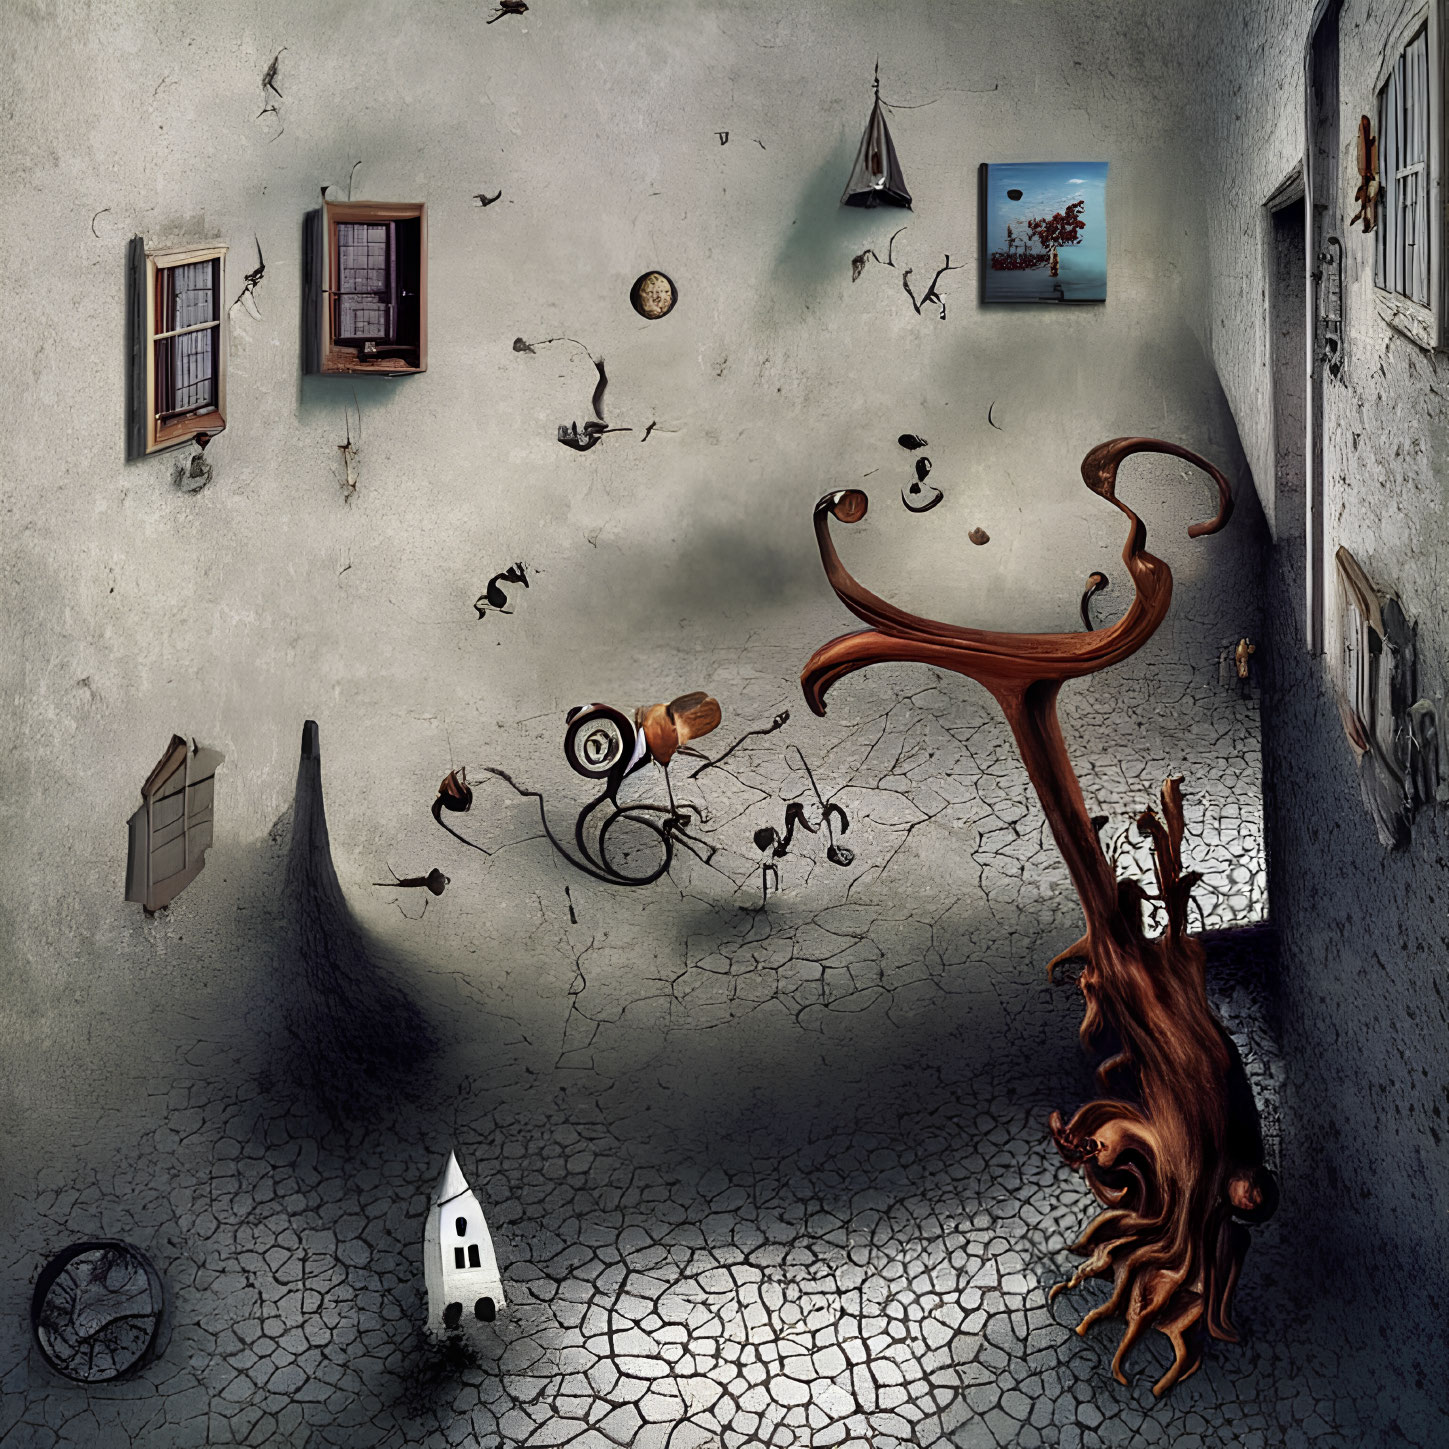 Surreal room artwork with upside-down tree and floating objects